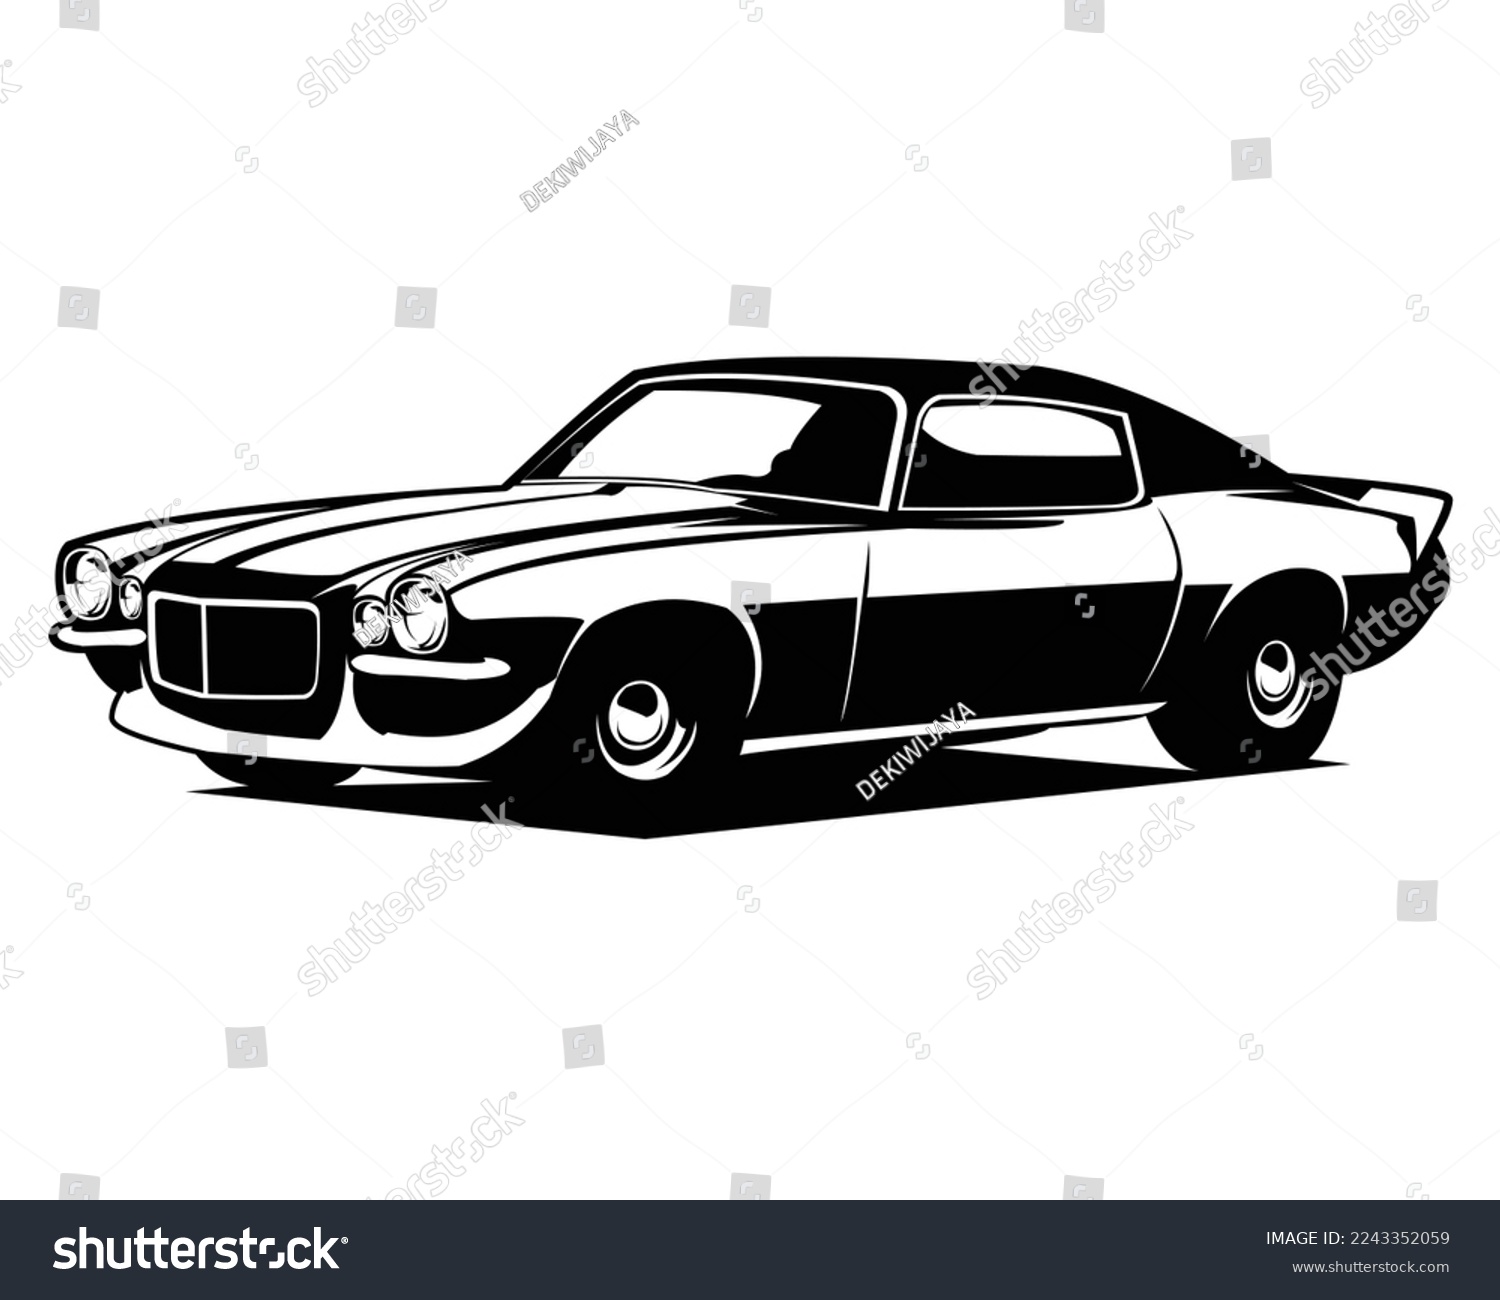 SVG of  1970 chevy camaro silhouette. isolated white background view from side. Best for badge, emblem, icon, sticker design, car industry. available in eps 10. svg